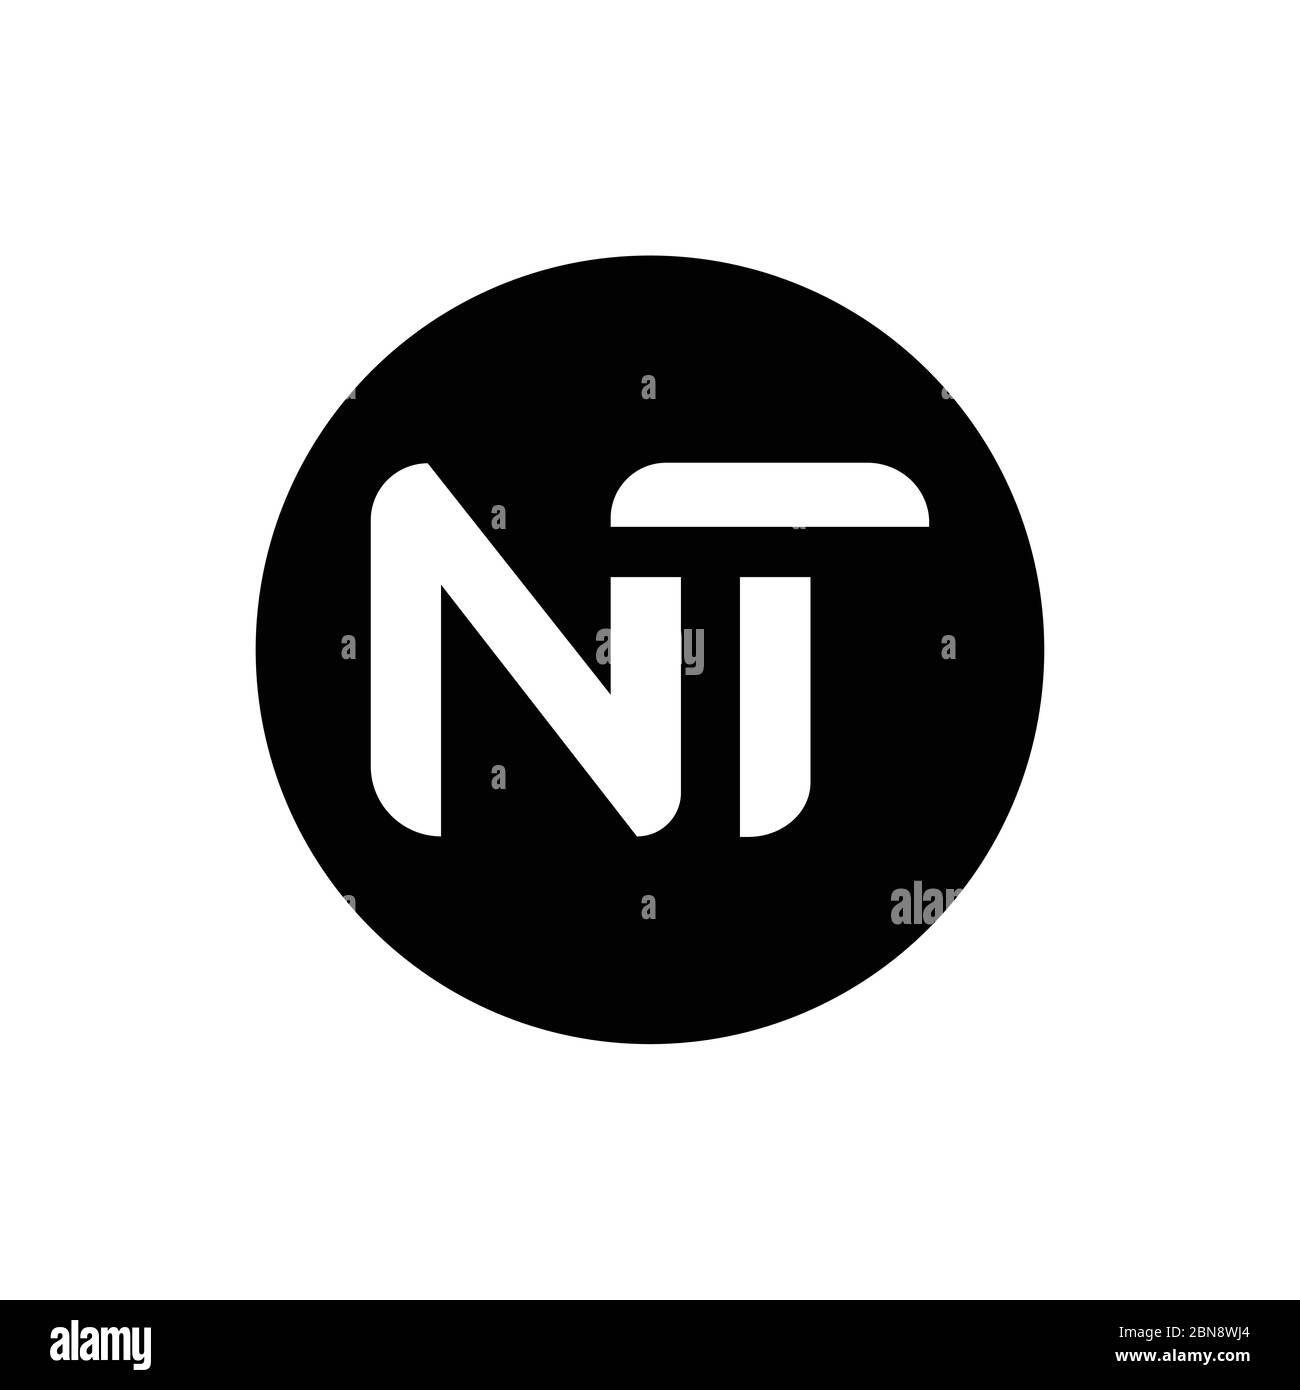 Initial Letter NT Logo Design Vector Template. Creative Abstract NT Letter Logo Design Stock Vector